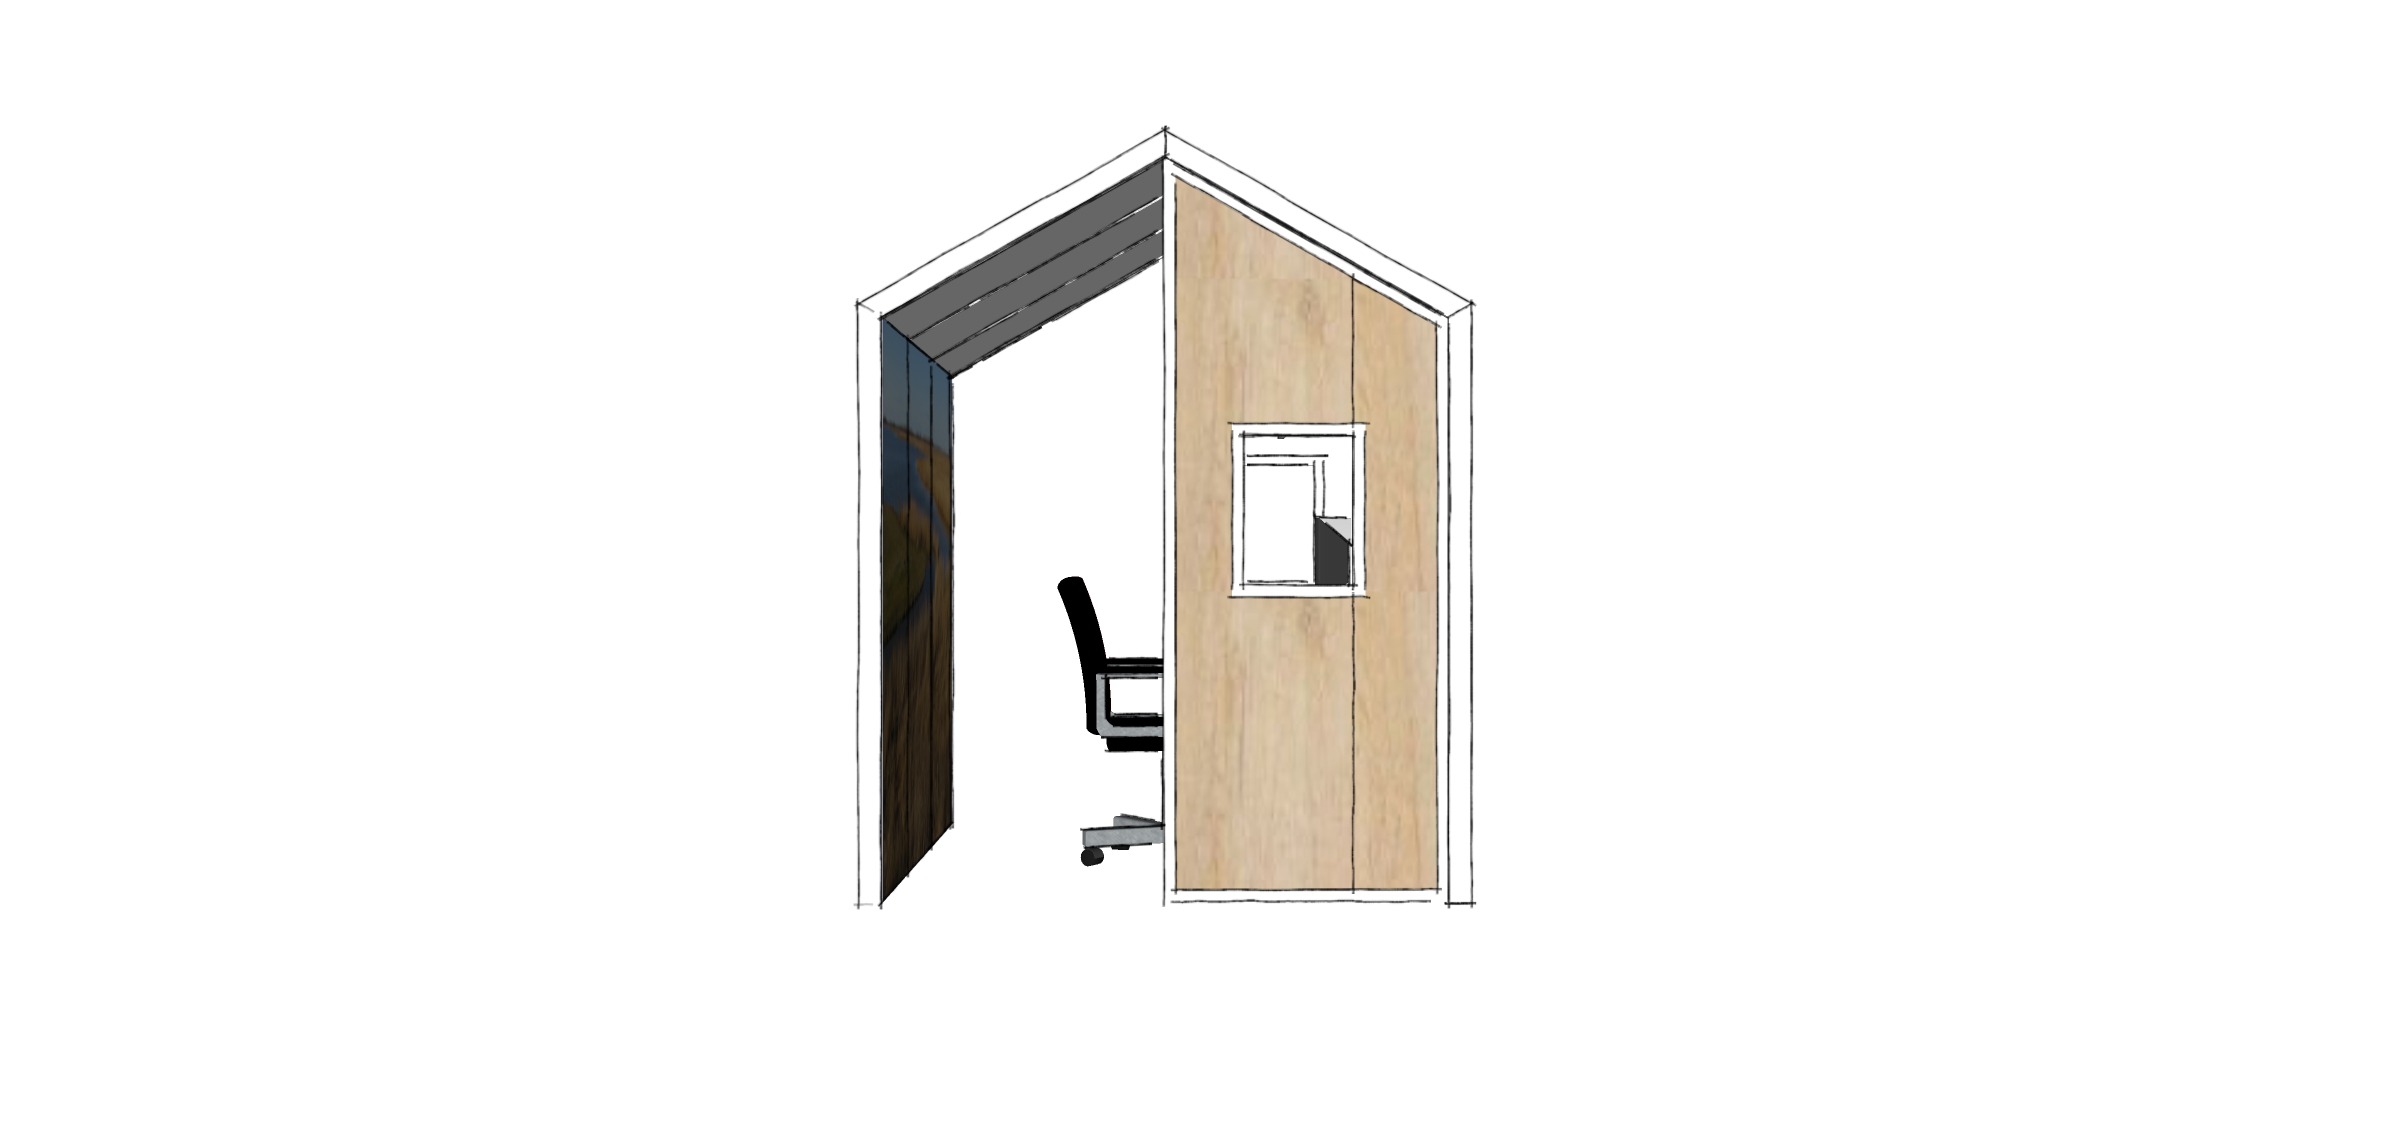 Tiny workplaces ontwerp 1 (2)